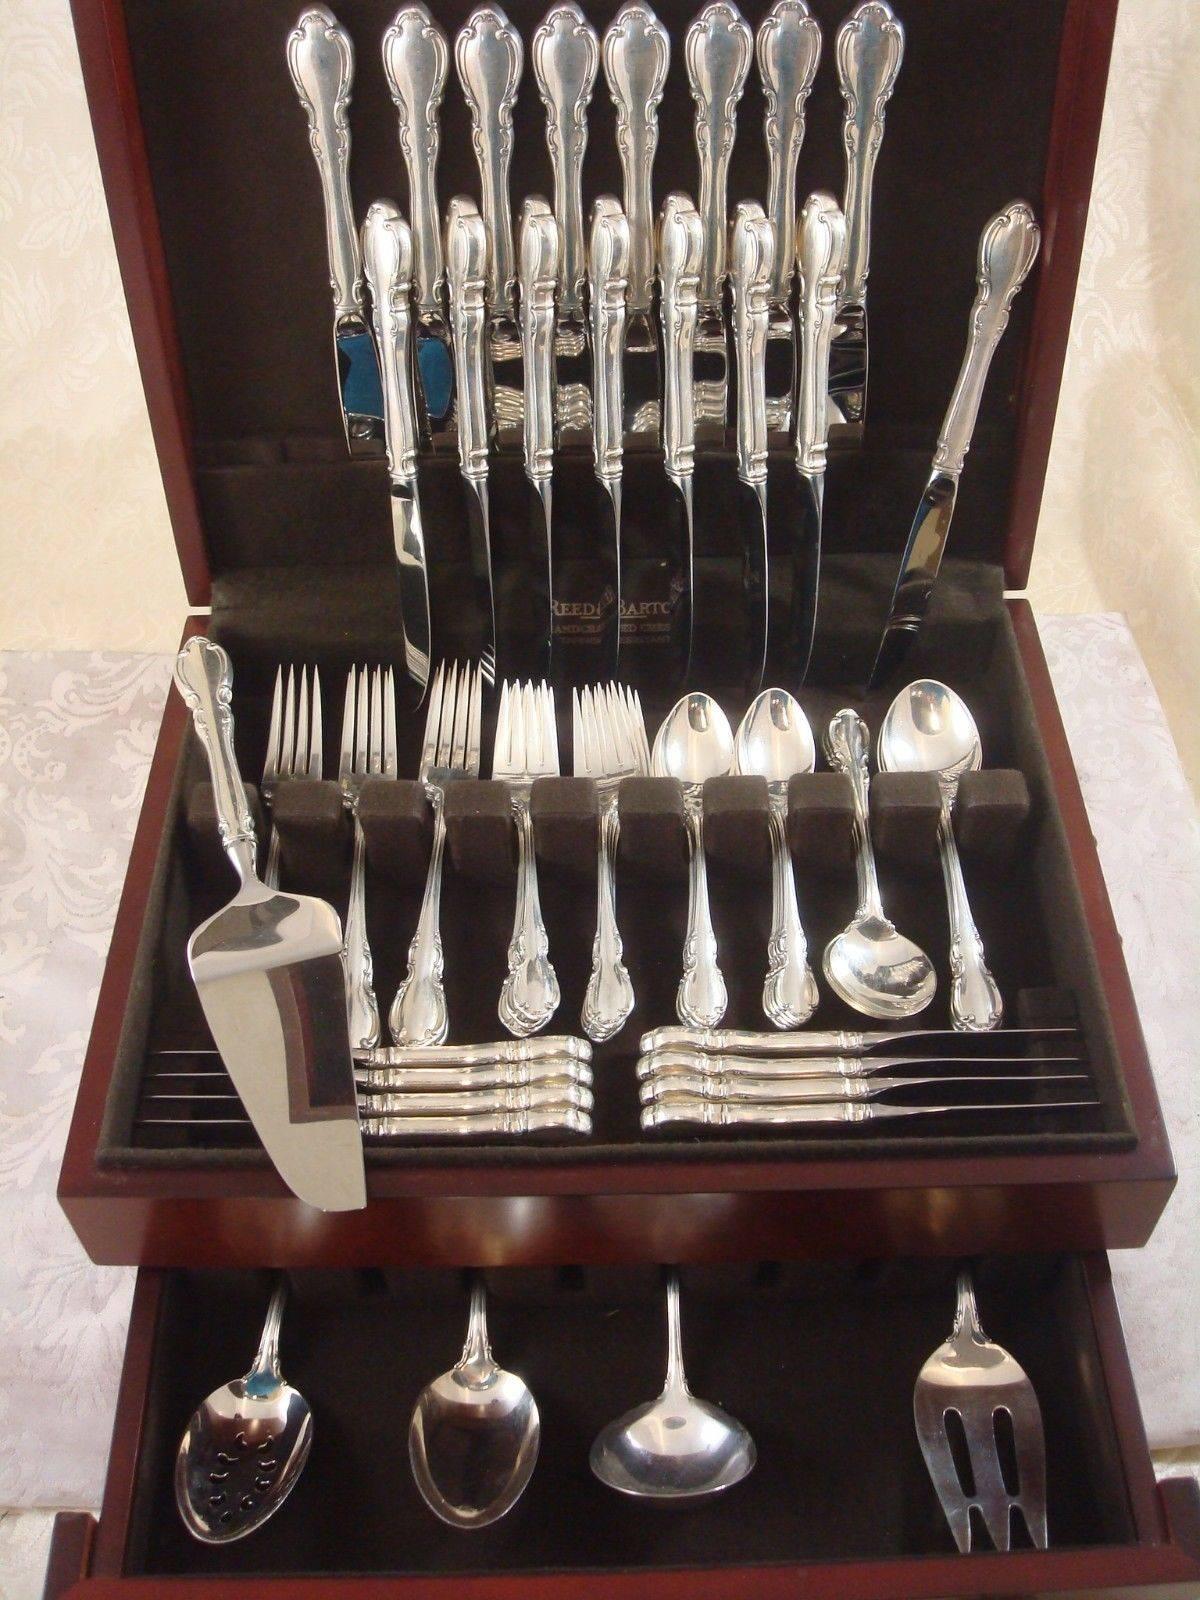 Dinner size Legato by Towle sterling silver flatware set of 61 pieces, in excellent condition. This set includes:

Eight dinner size knives, 9 1/2